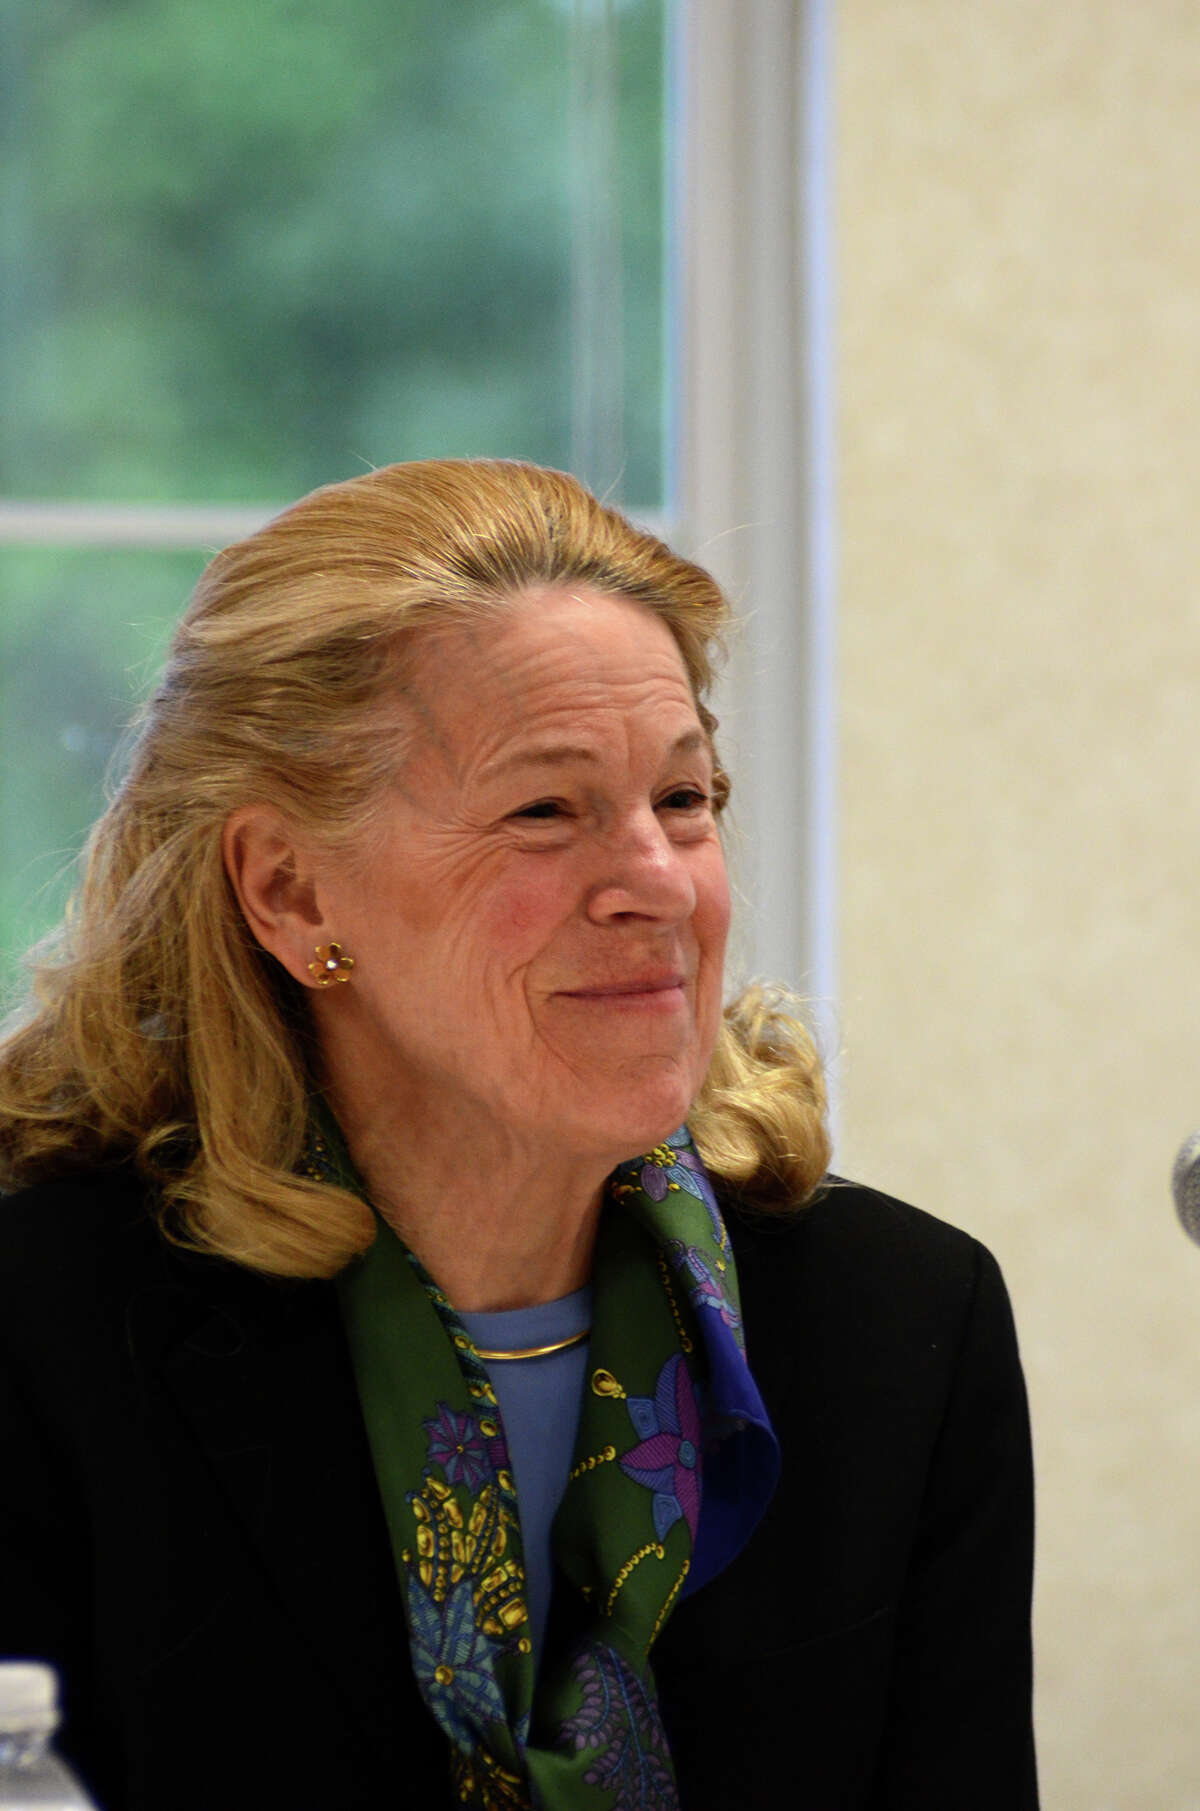 Leslie Tarkington, member of the Board of Estimation and Taxation, at Greenwich Town Hall on Monday, May 21, 2012.